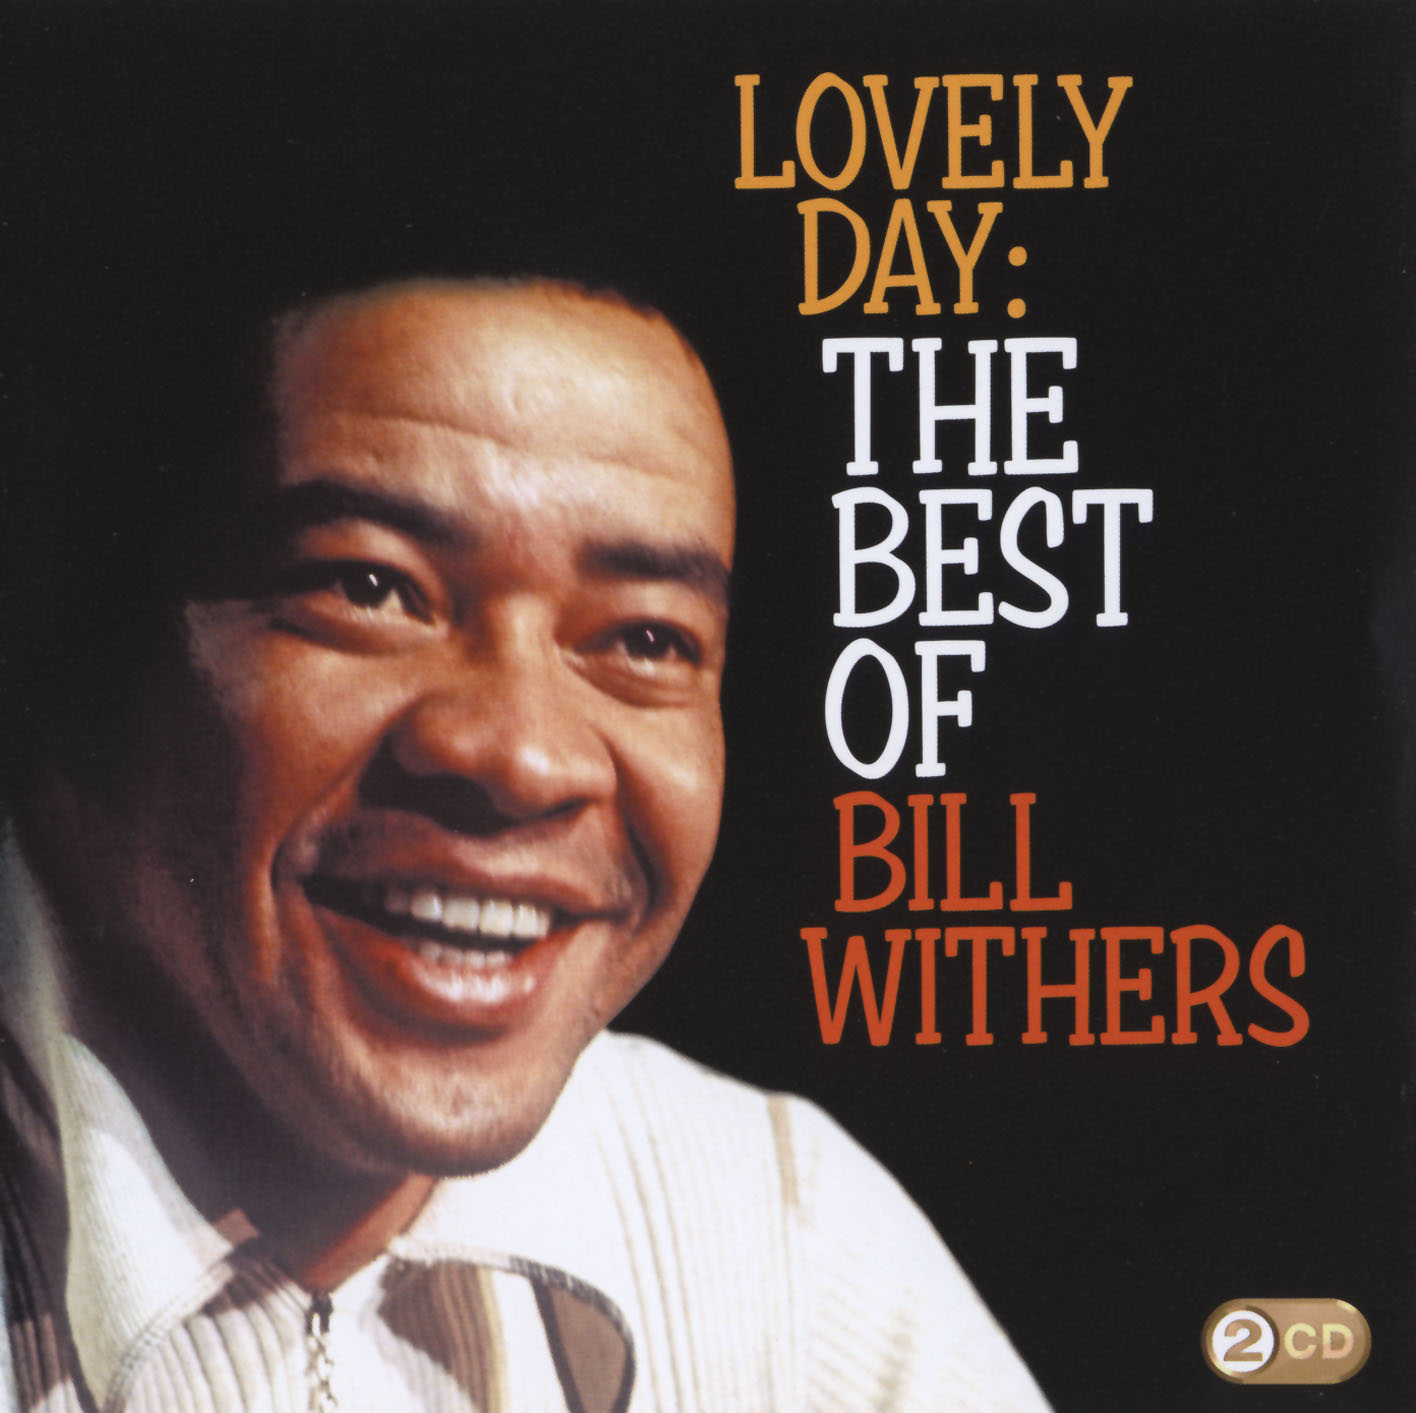 Lovely Day: The Best Of Bill Withers